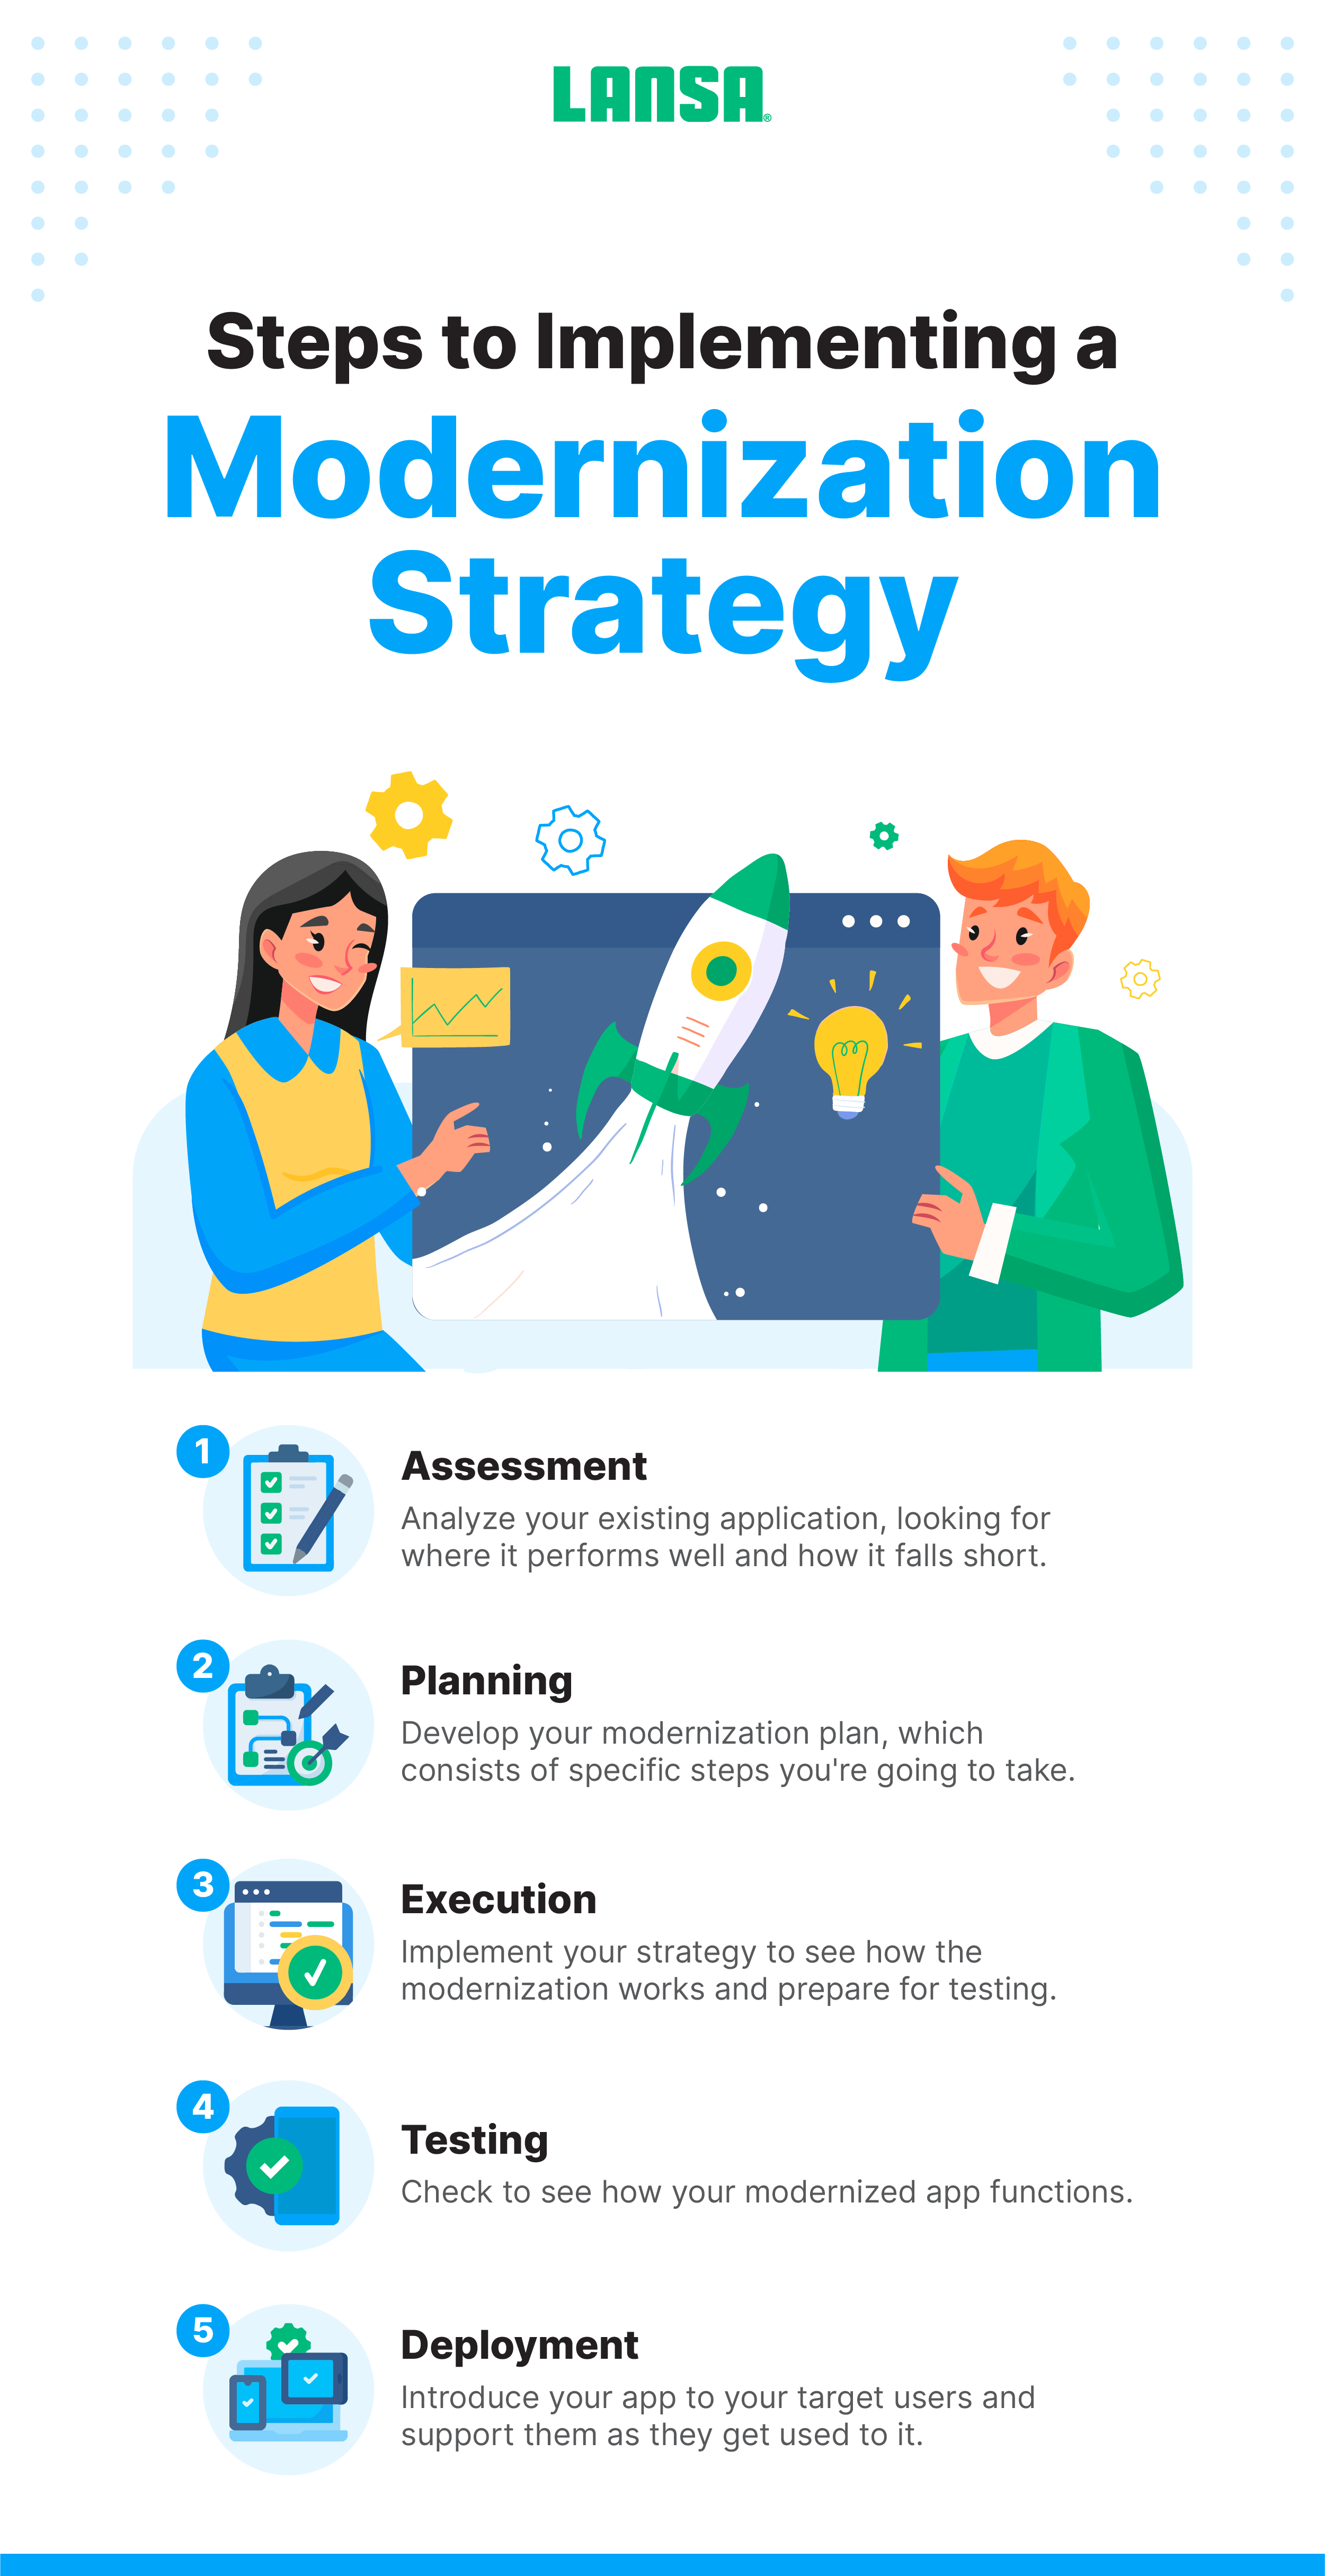 Steps to Implementing a Modernization Strategy infographic